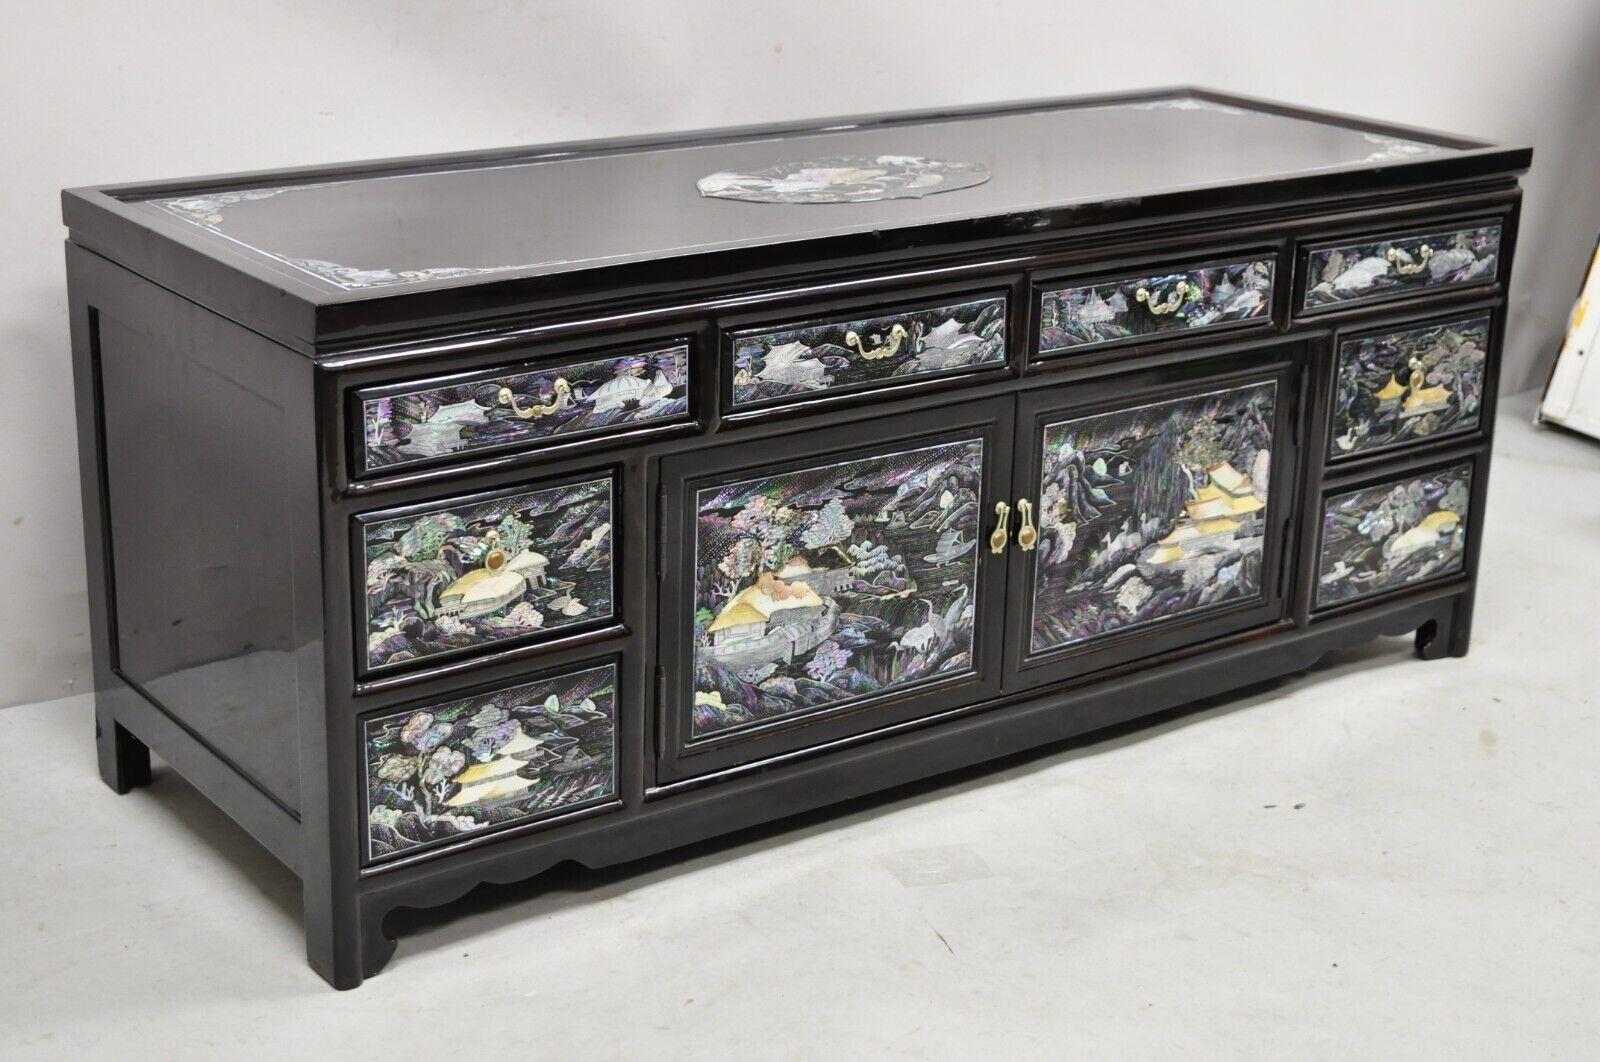 Vintage Korean figural mother of pearl inlay black lacquer low cabinet. Item features stunning figural mother of pearl inlay throughout, black lacquer finish, 2 swing drawers, 6 drawers, great style and form, nice low cabinet. Circa late 20th